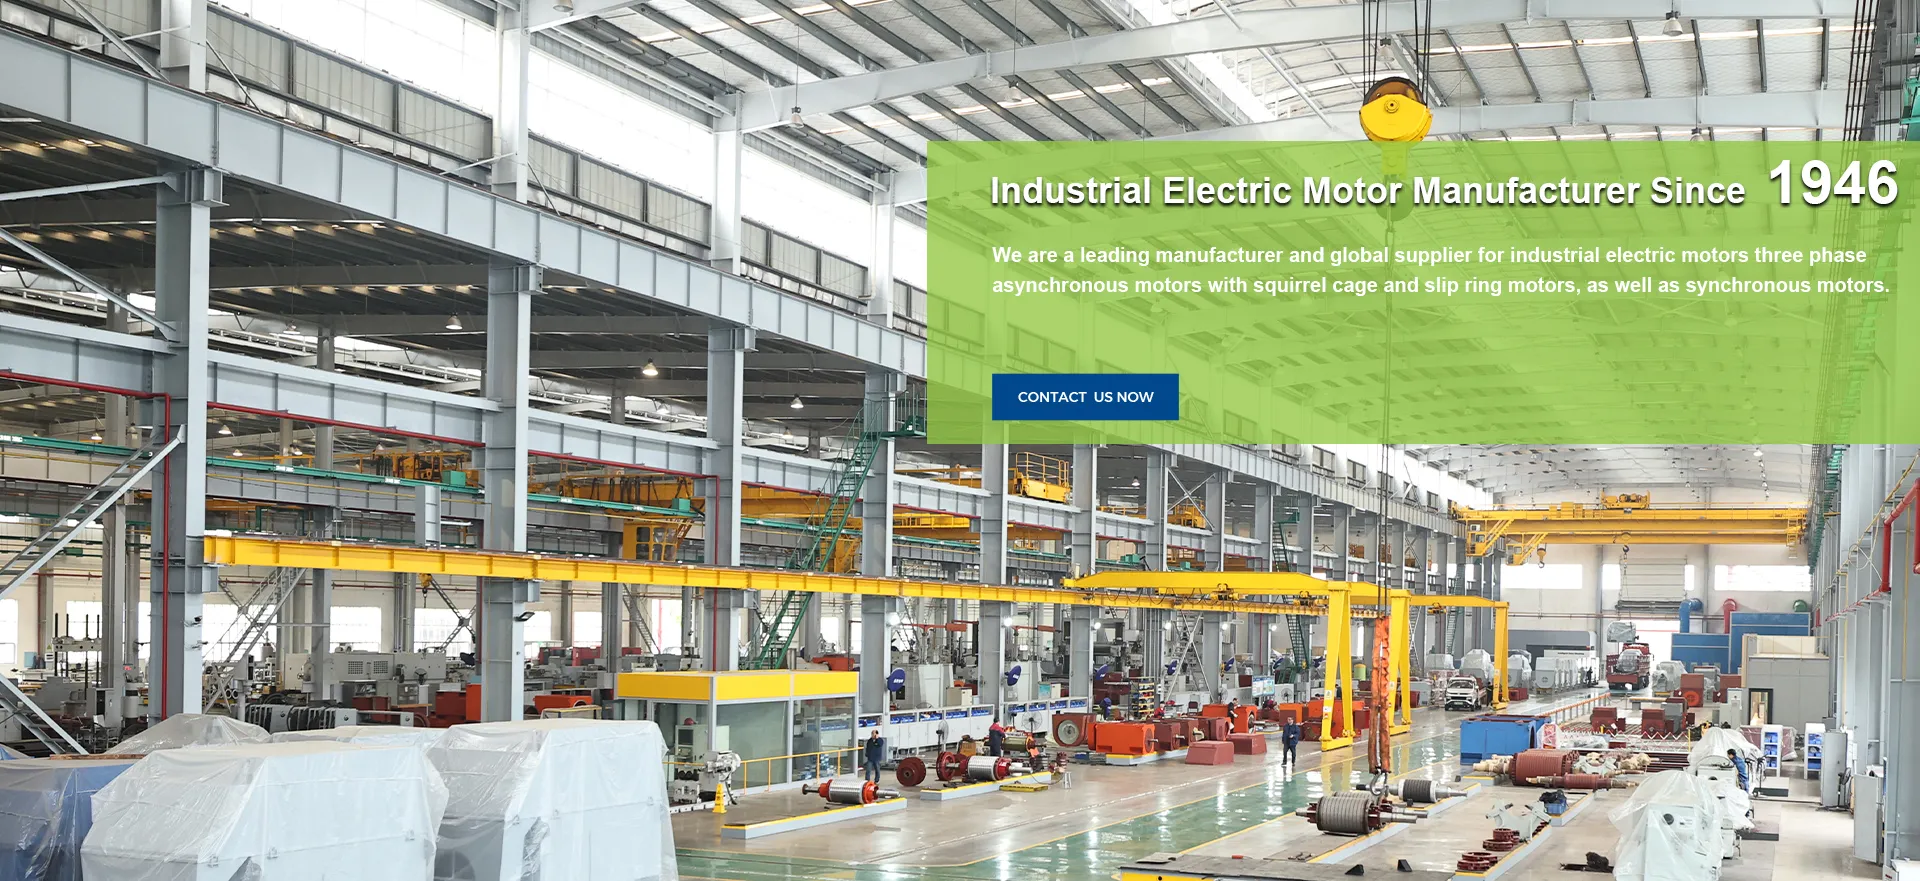 Industrial Electric Motor Manufacturer Since 1946